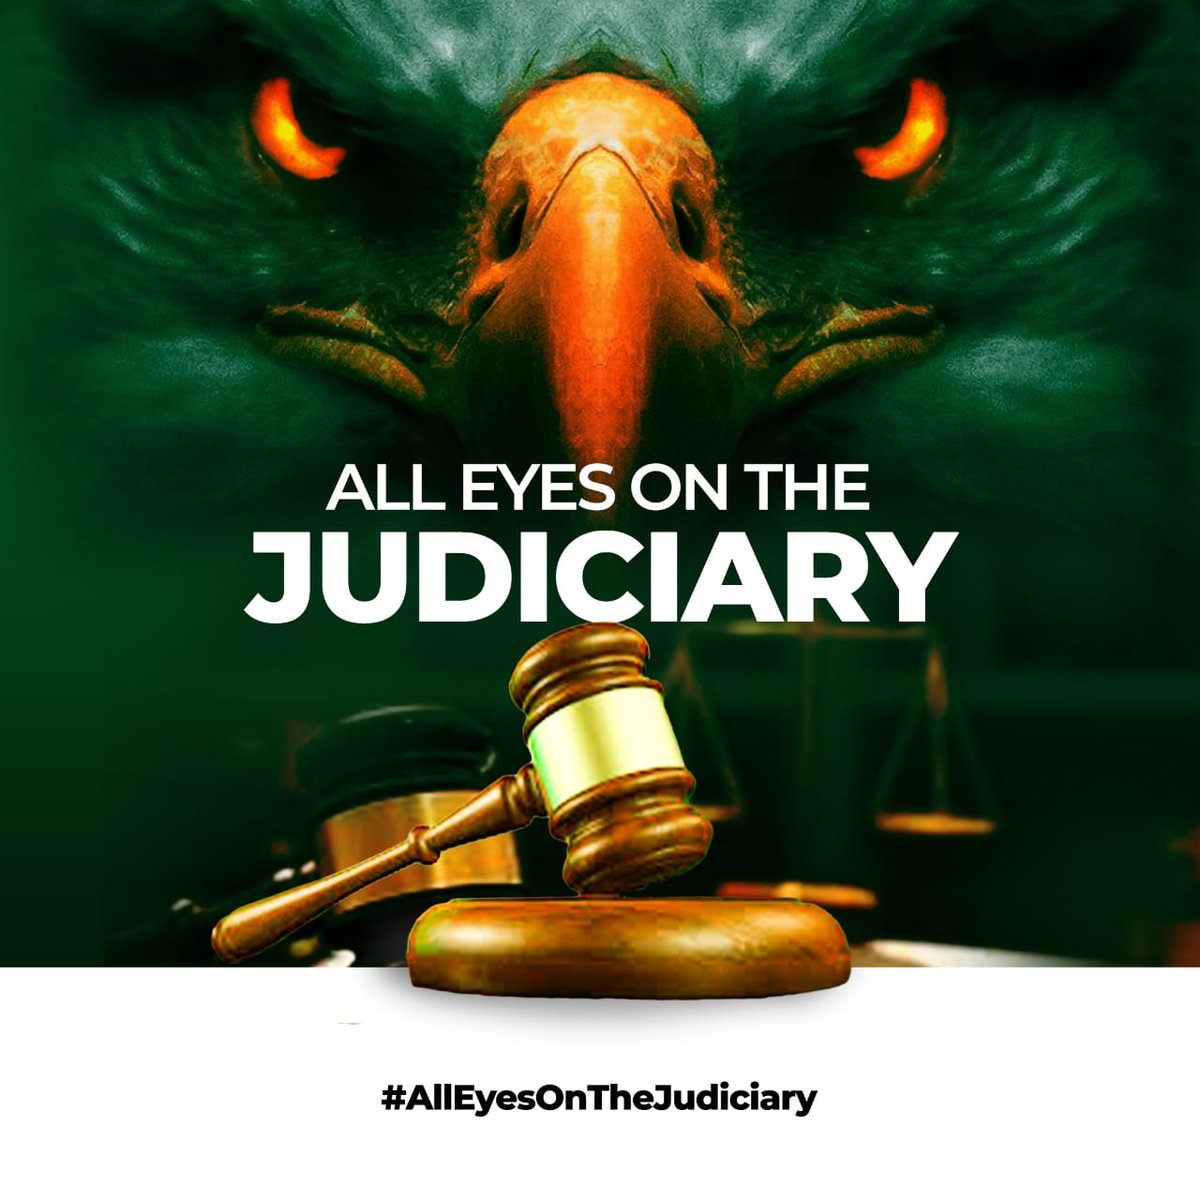 Dev!l uses decoys, confusn to keep you from your focus & by implicatn goal
◇BBMzansi. Failed🇳🇬kept💯focus
◇BBNReunion. Focus Retaind
◇ BBNAllStars
AllUnder12Mths
No Coincidence!
Rather a Hail Mary Shot
This will be their conviction 
#AllEyesOnTheJudiciary
Oct.20.20💔 #EndSARS